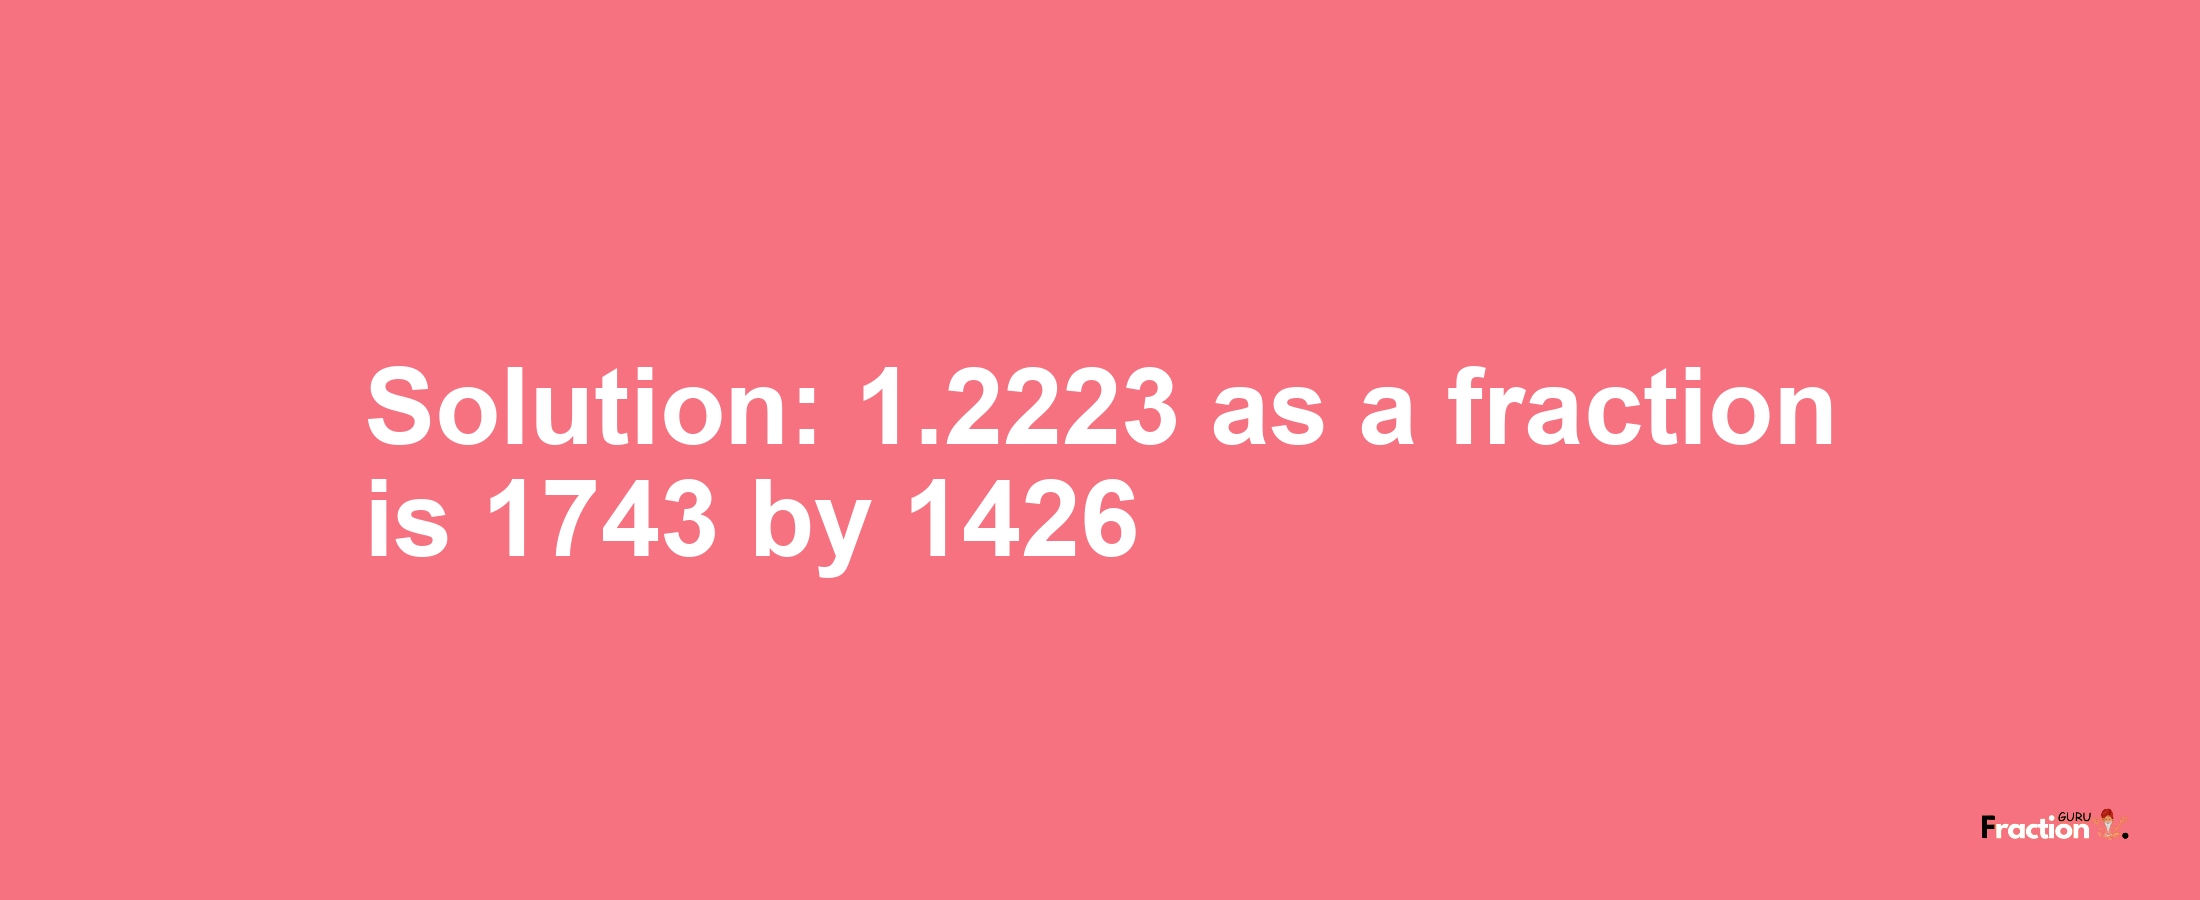 Solution:1.2223 as a fraction is 1743/1426